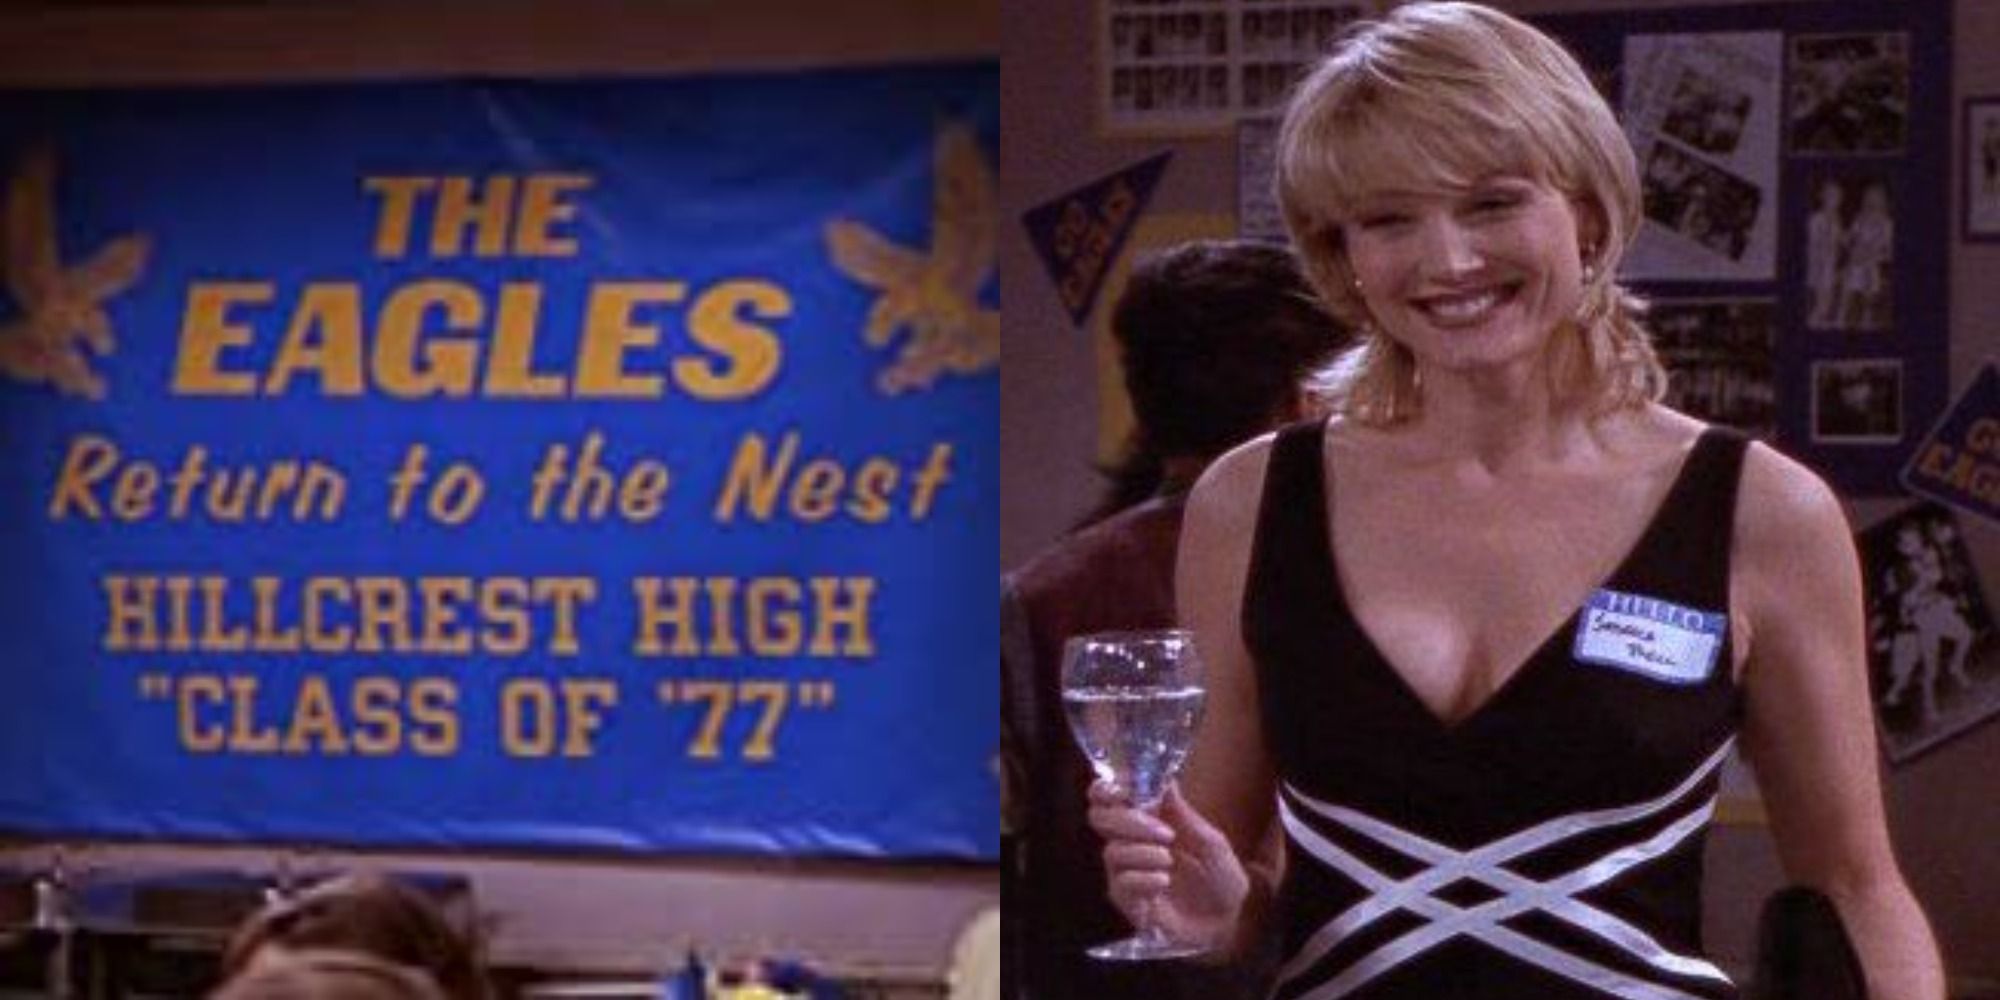 Split image showing the high school reunion banner and Jessica Bell smiling